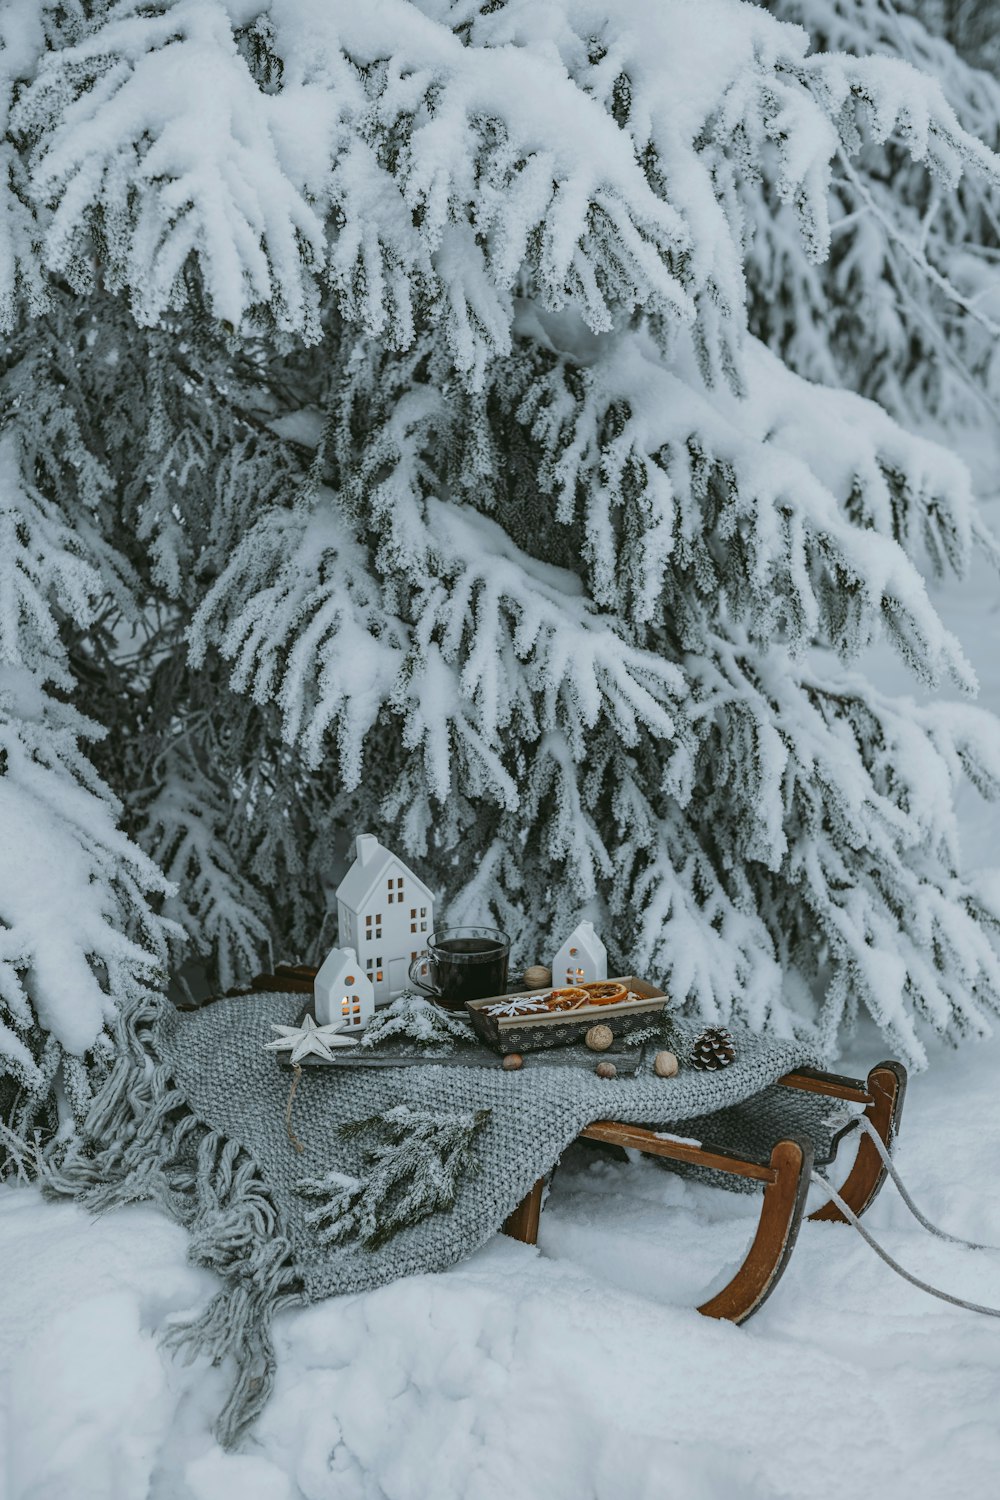 a sled with a house on top of it in the snow